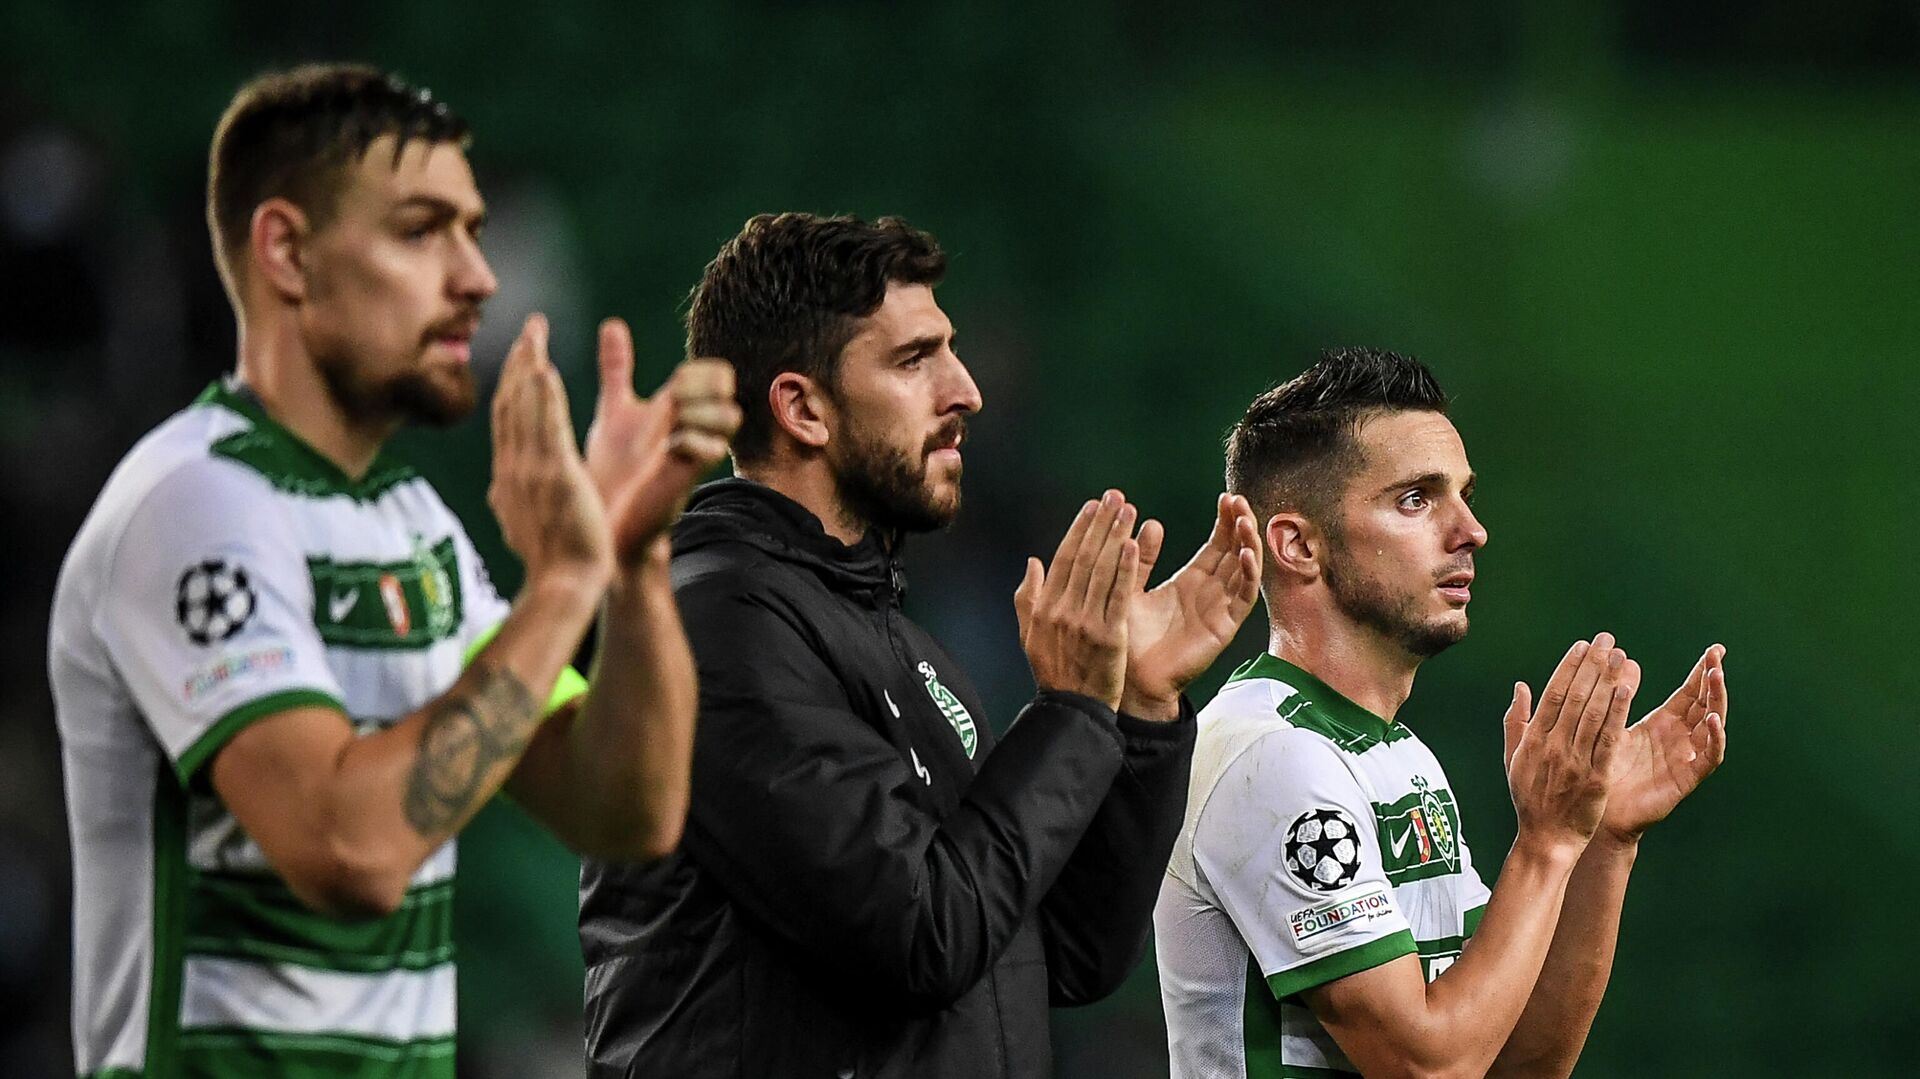 (From L) Sporting Lisbon's Uruguayan defender Sebastian Coates, Sporting's Portuguese forward Paulinho Dias Fernandes and Sporting Lisbon's Spanish forward Pablo Sarabia applaud supporters at the end of the UEFA Champions League first round group C football match between Sporting CP and Besiktas JK at the Jose Alvalade stadium in Lisbon on November 3, 2021. (Photo by PATRICIA DE MELO MOREIRA / AFP) - РИА Новости, 1920, 04.11.2021